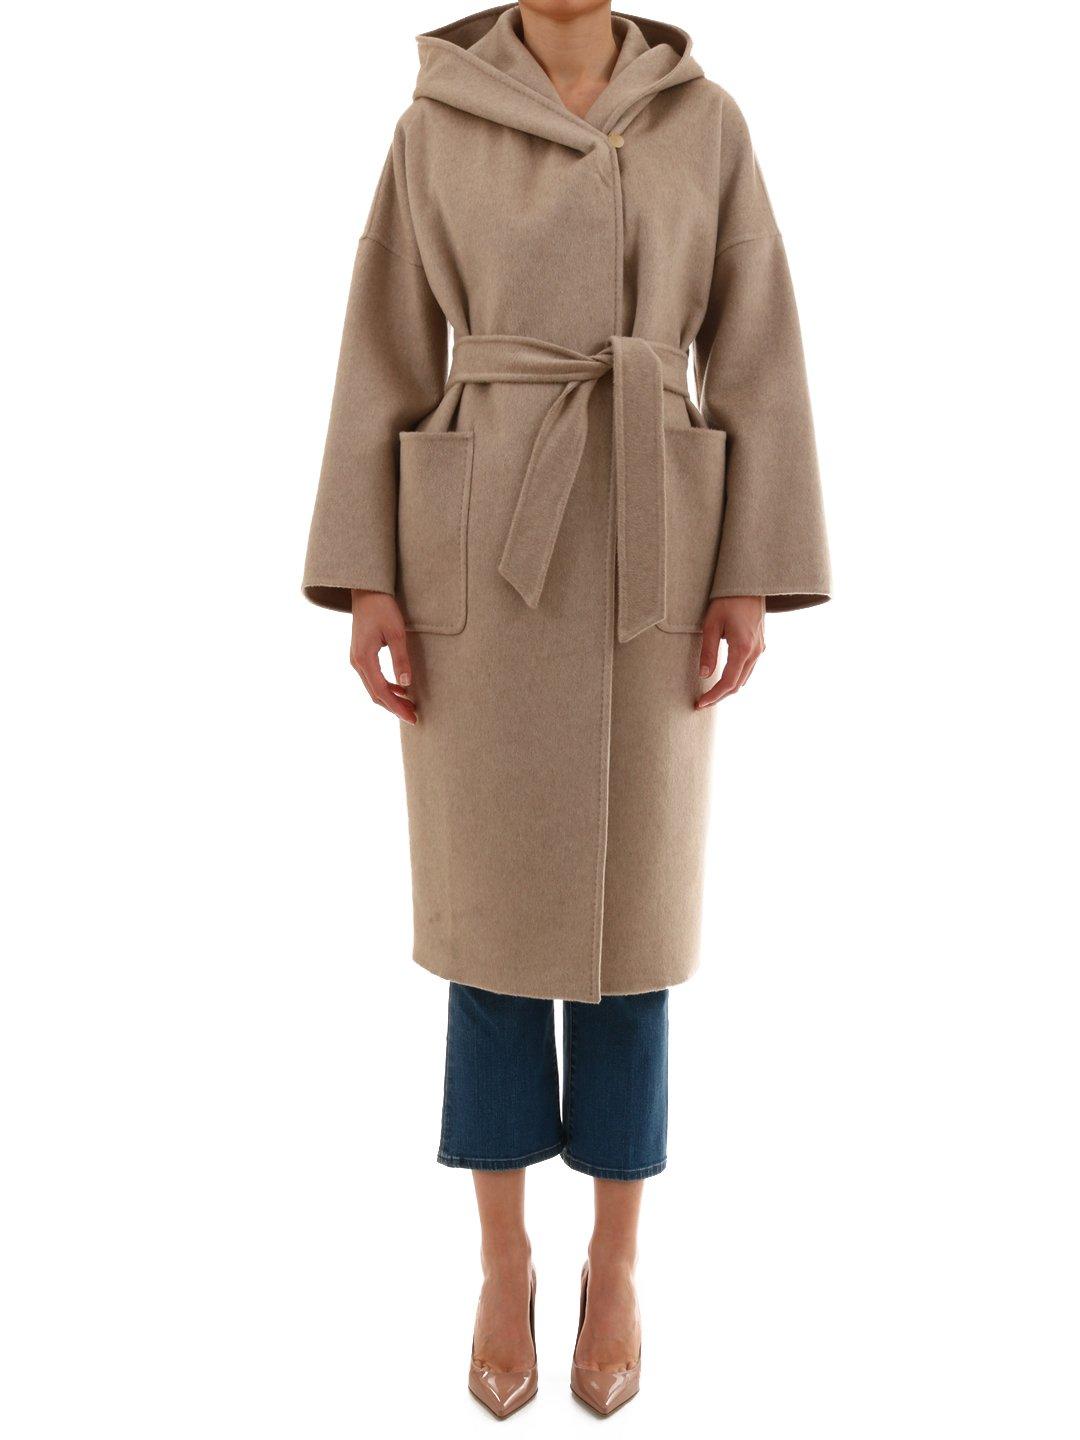 Max Mara Belted Hooded Wrap Coat in Beige (Natural) - Lyst